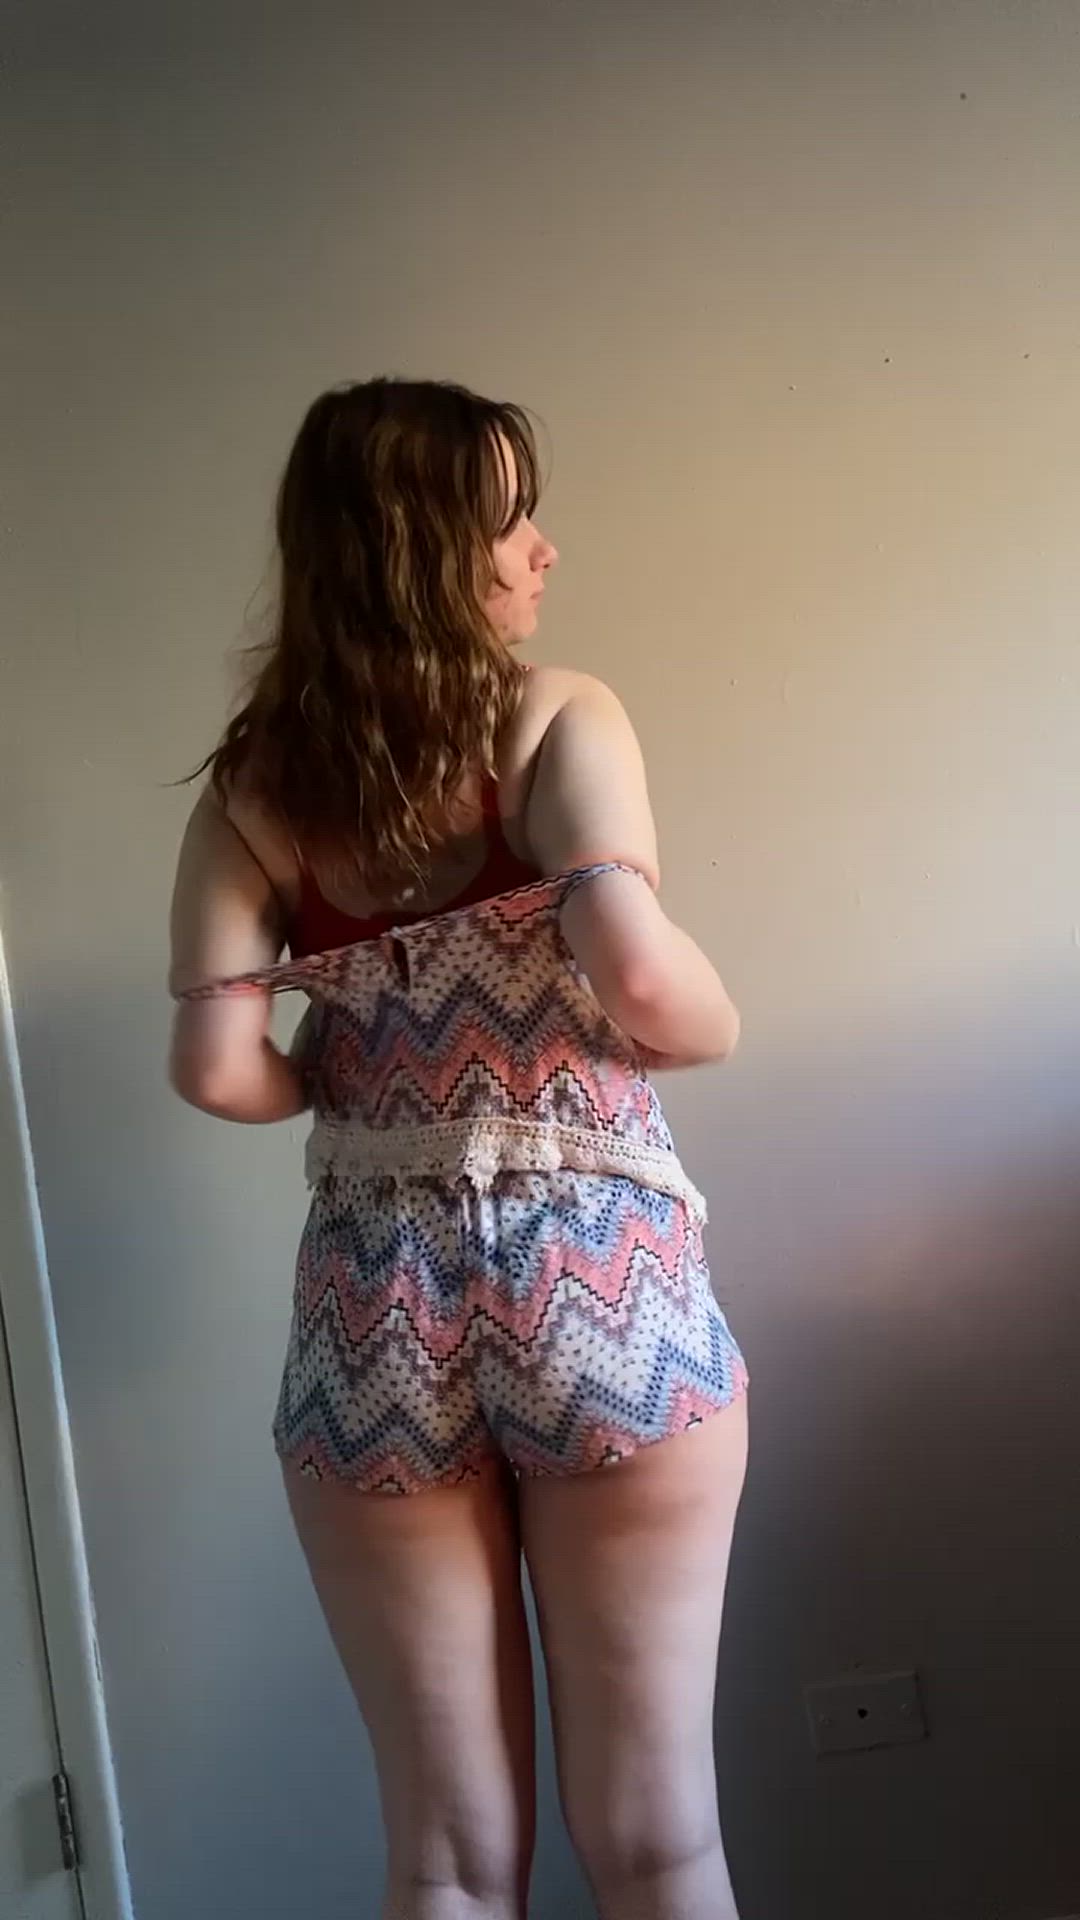 Ass porn video with onlyfans model xmilkyprincess <strong>@xmilkyprincess</strong>